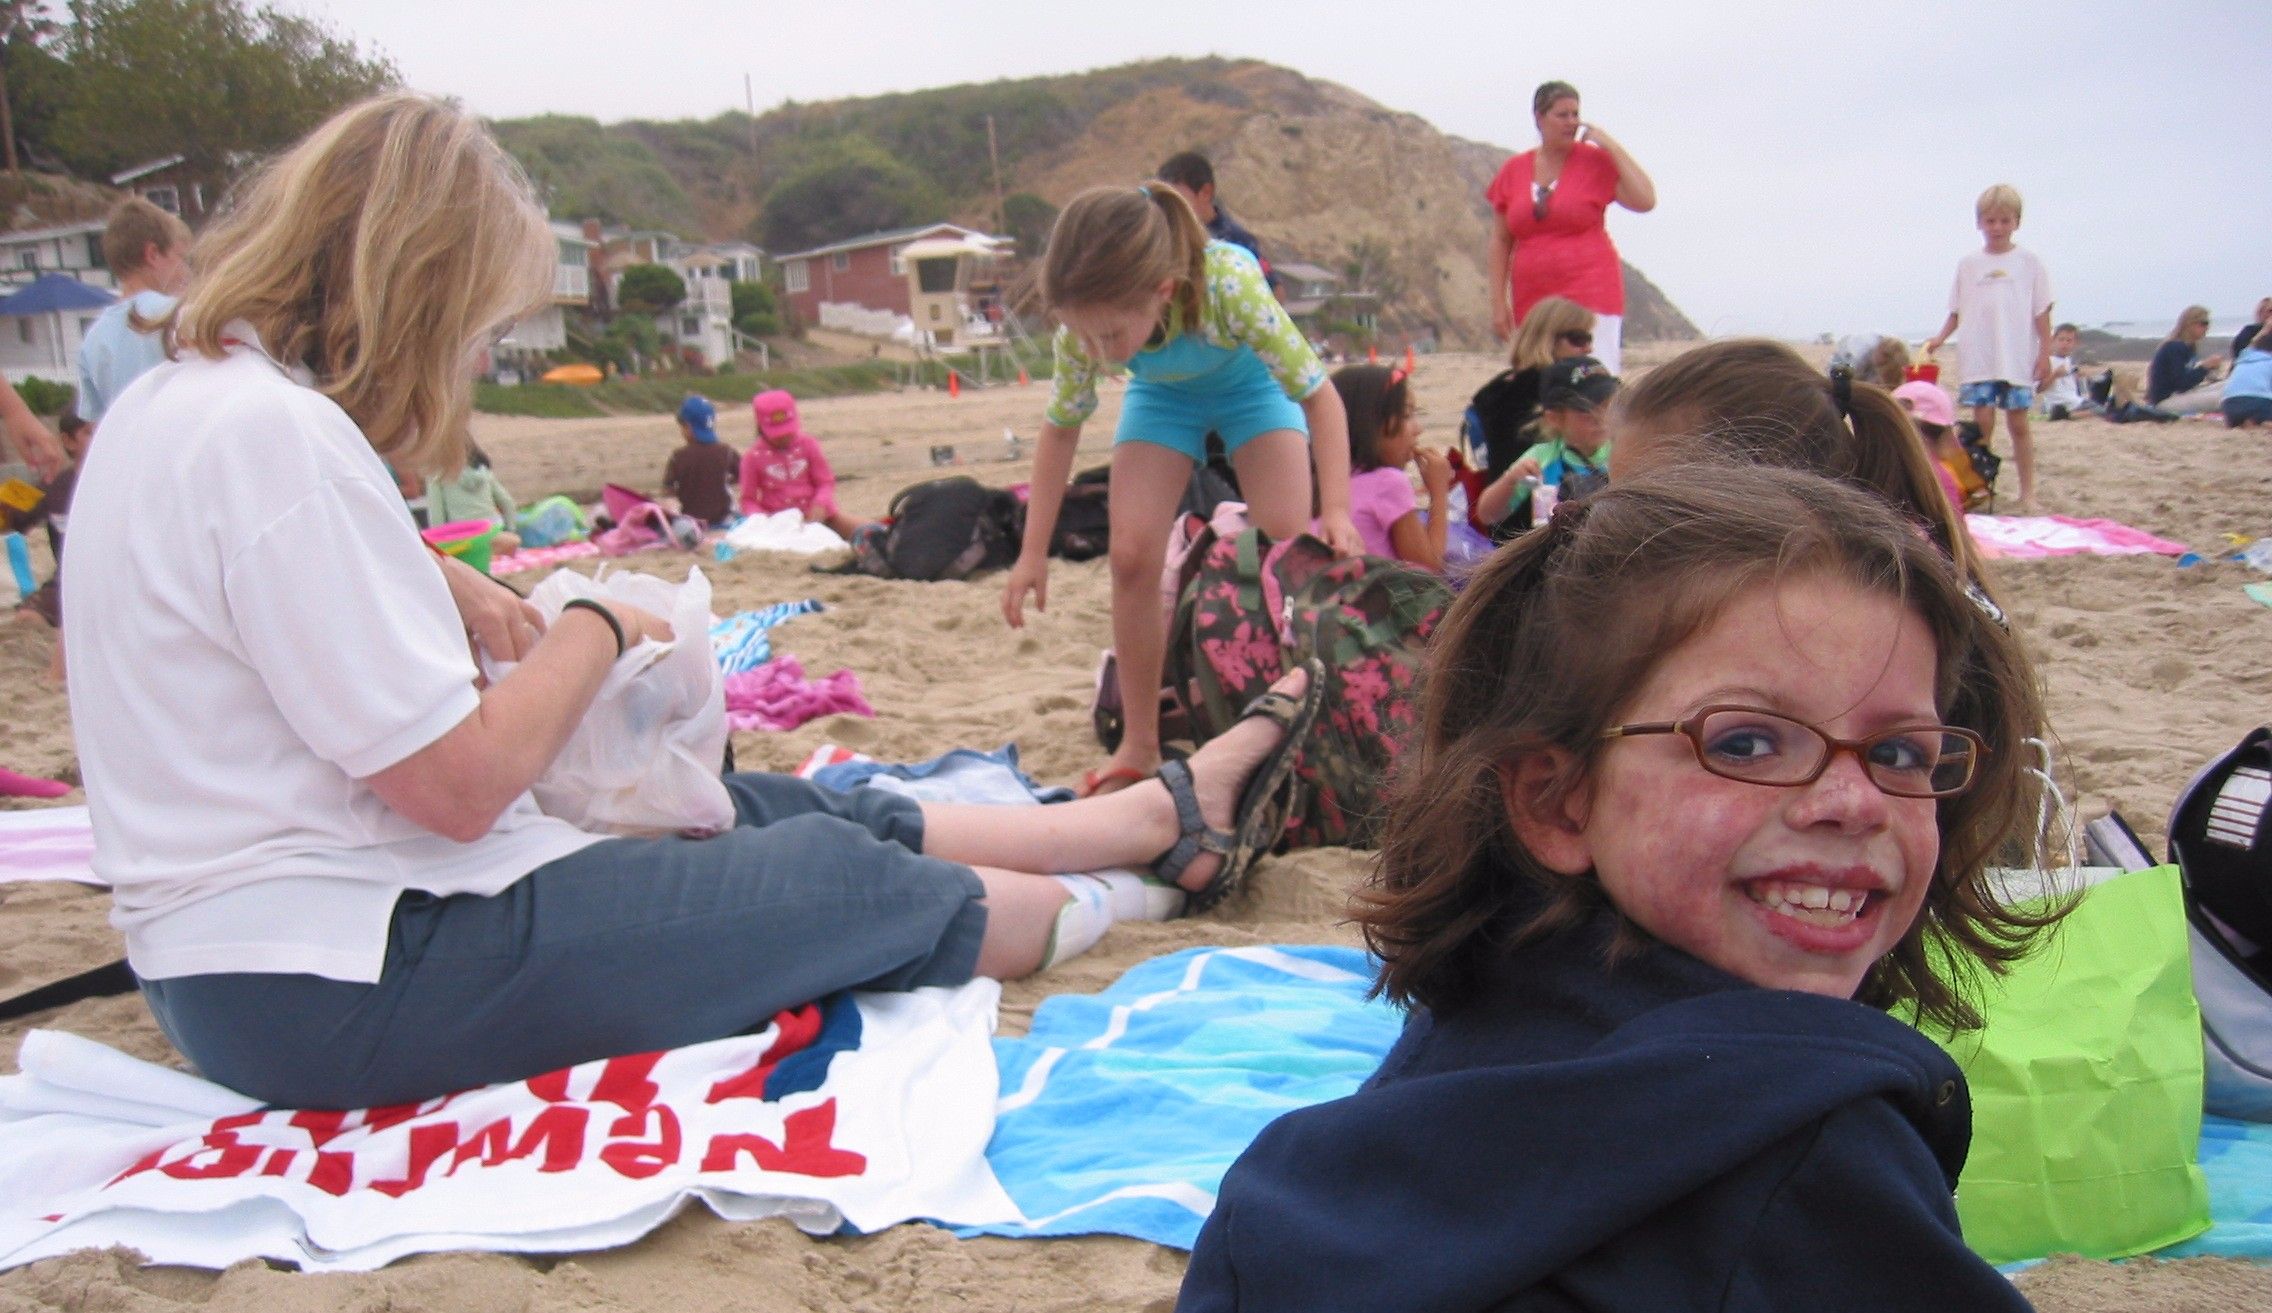 On the beach with a girl in the foreground with Sturge-Weber syndrome